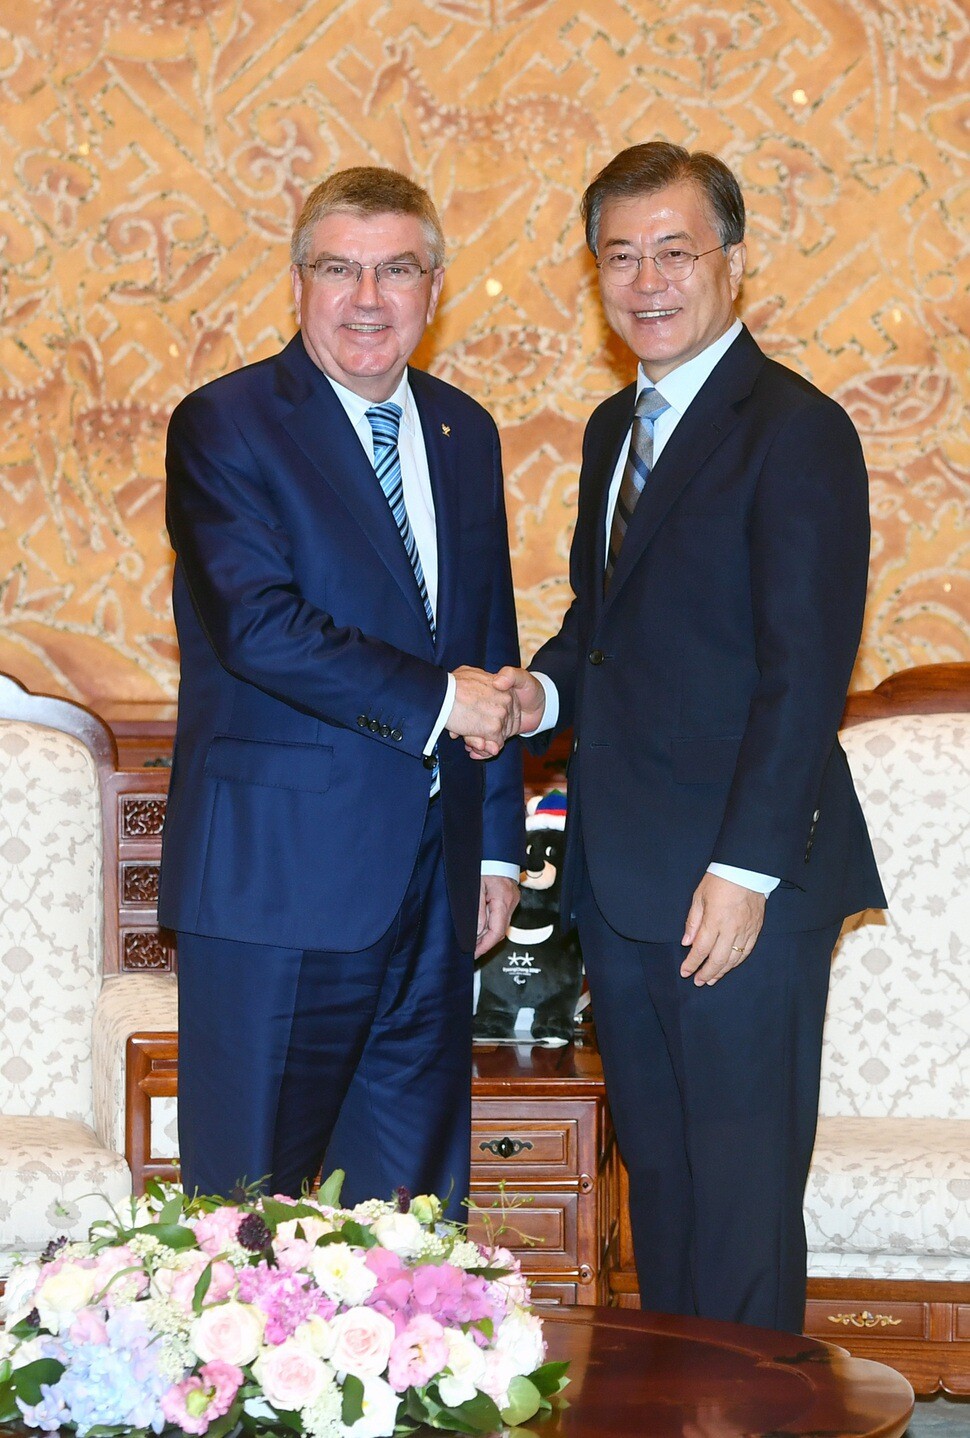 President Moon Jae-in shakes hands with International Olympic Committee president Thomas Bach at the Blue House on July 3. (Blue House photo pool)